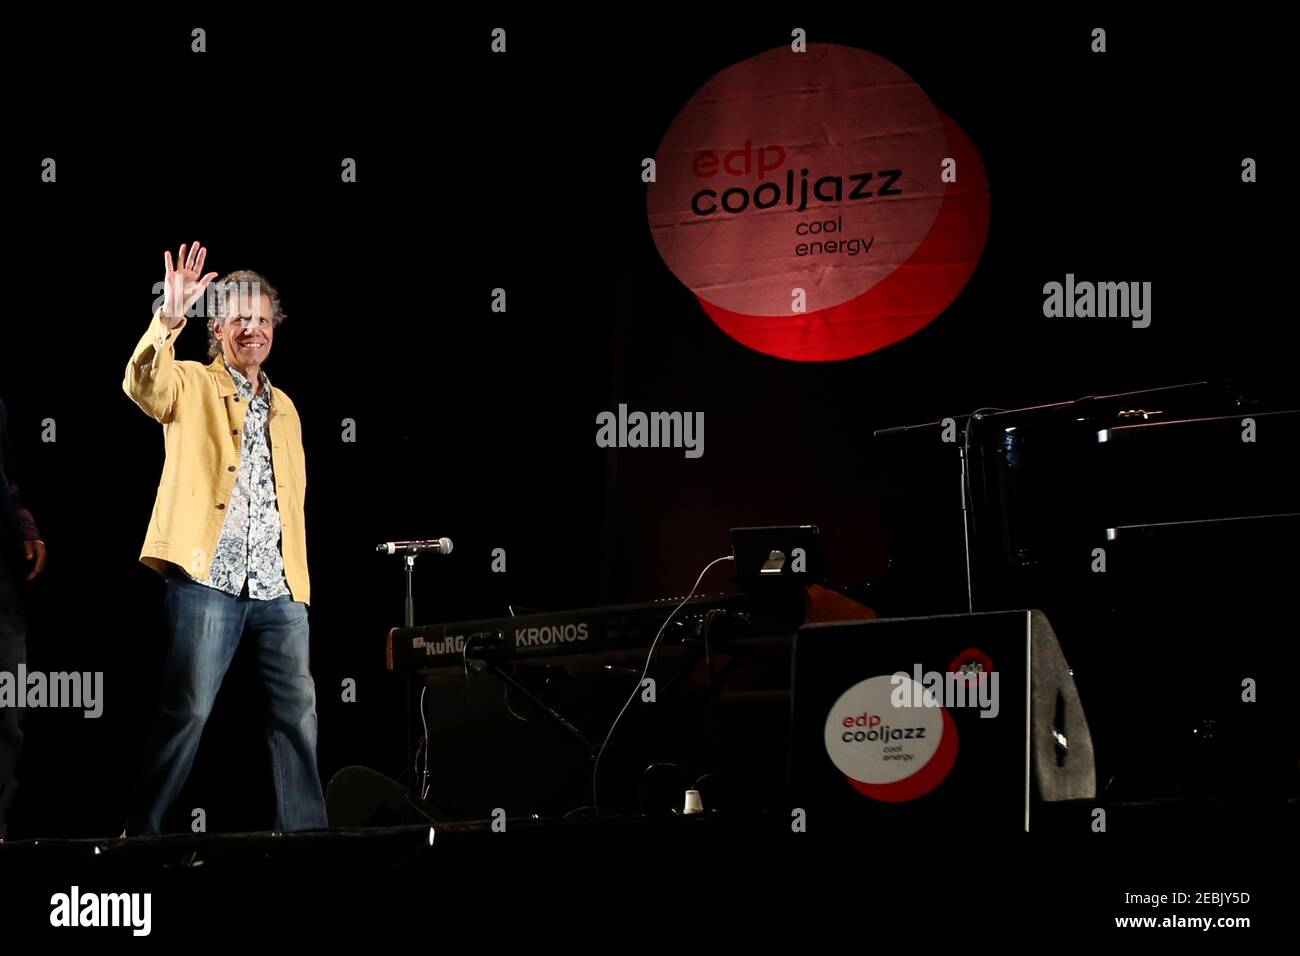 February 11, 2021, NEW YORK, USA: FILE IMAGE: US jazz pianist Chick Corea performs at the EDP Cool Jazz Festival in Oeiras, Portugal on July 19, 2015. Corea, a towering jazz pianist with a staggering 23 Grammy awards who pushed the boundaries of the genre and worked alongside Miles Davis and Herbie Hancock, has died. He was 79. Corea died Tuesday, Feb. 9, 2021, of a rare form of cancer, his team posted on his web site. His death was confirmed by Corea's web and marketing manager, Dan Muse. (Credit Image: © Pedro Fiuza/ZUMA Wire) Stock Photo